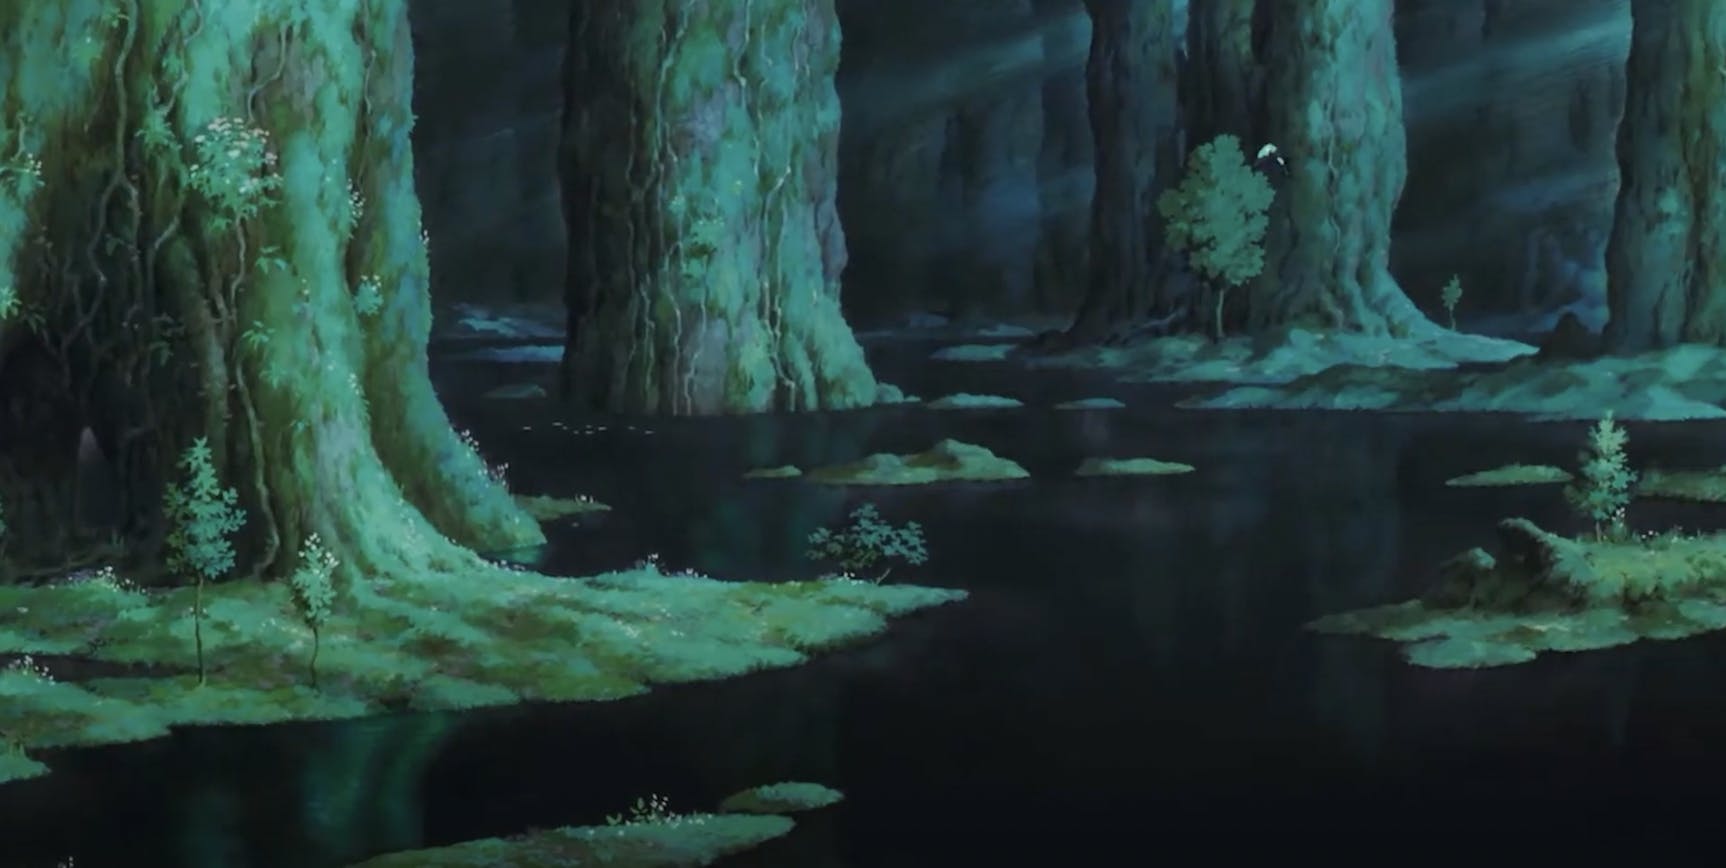 A still from Studio Ghibli's 'Princess Mononoke' with the enchanted wetlands and cedar forest which was inspired by Yakushima Island